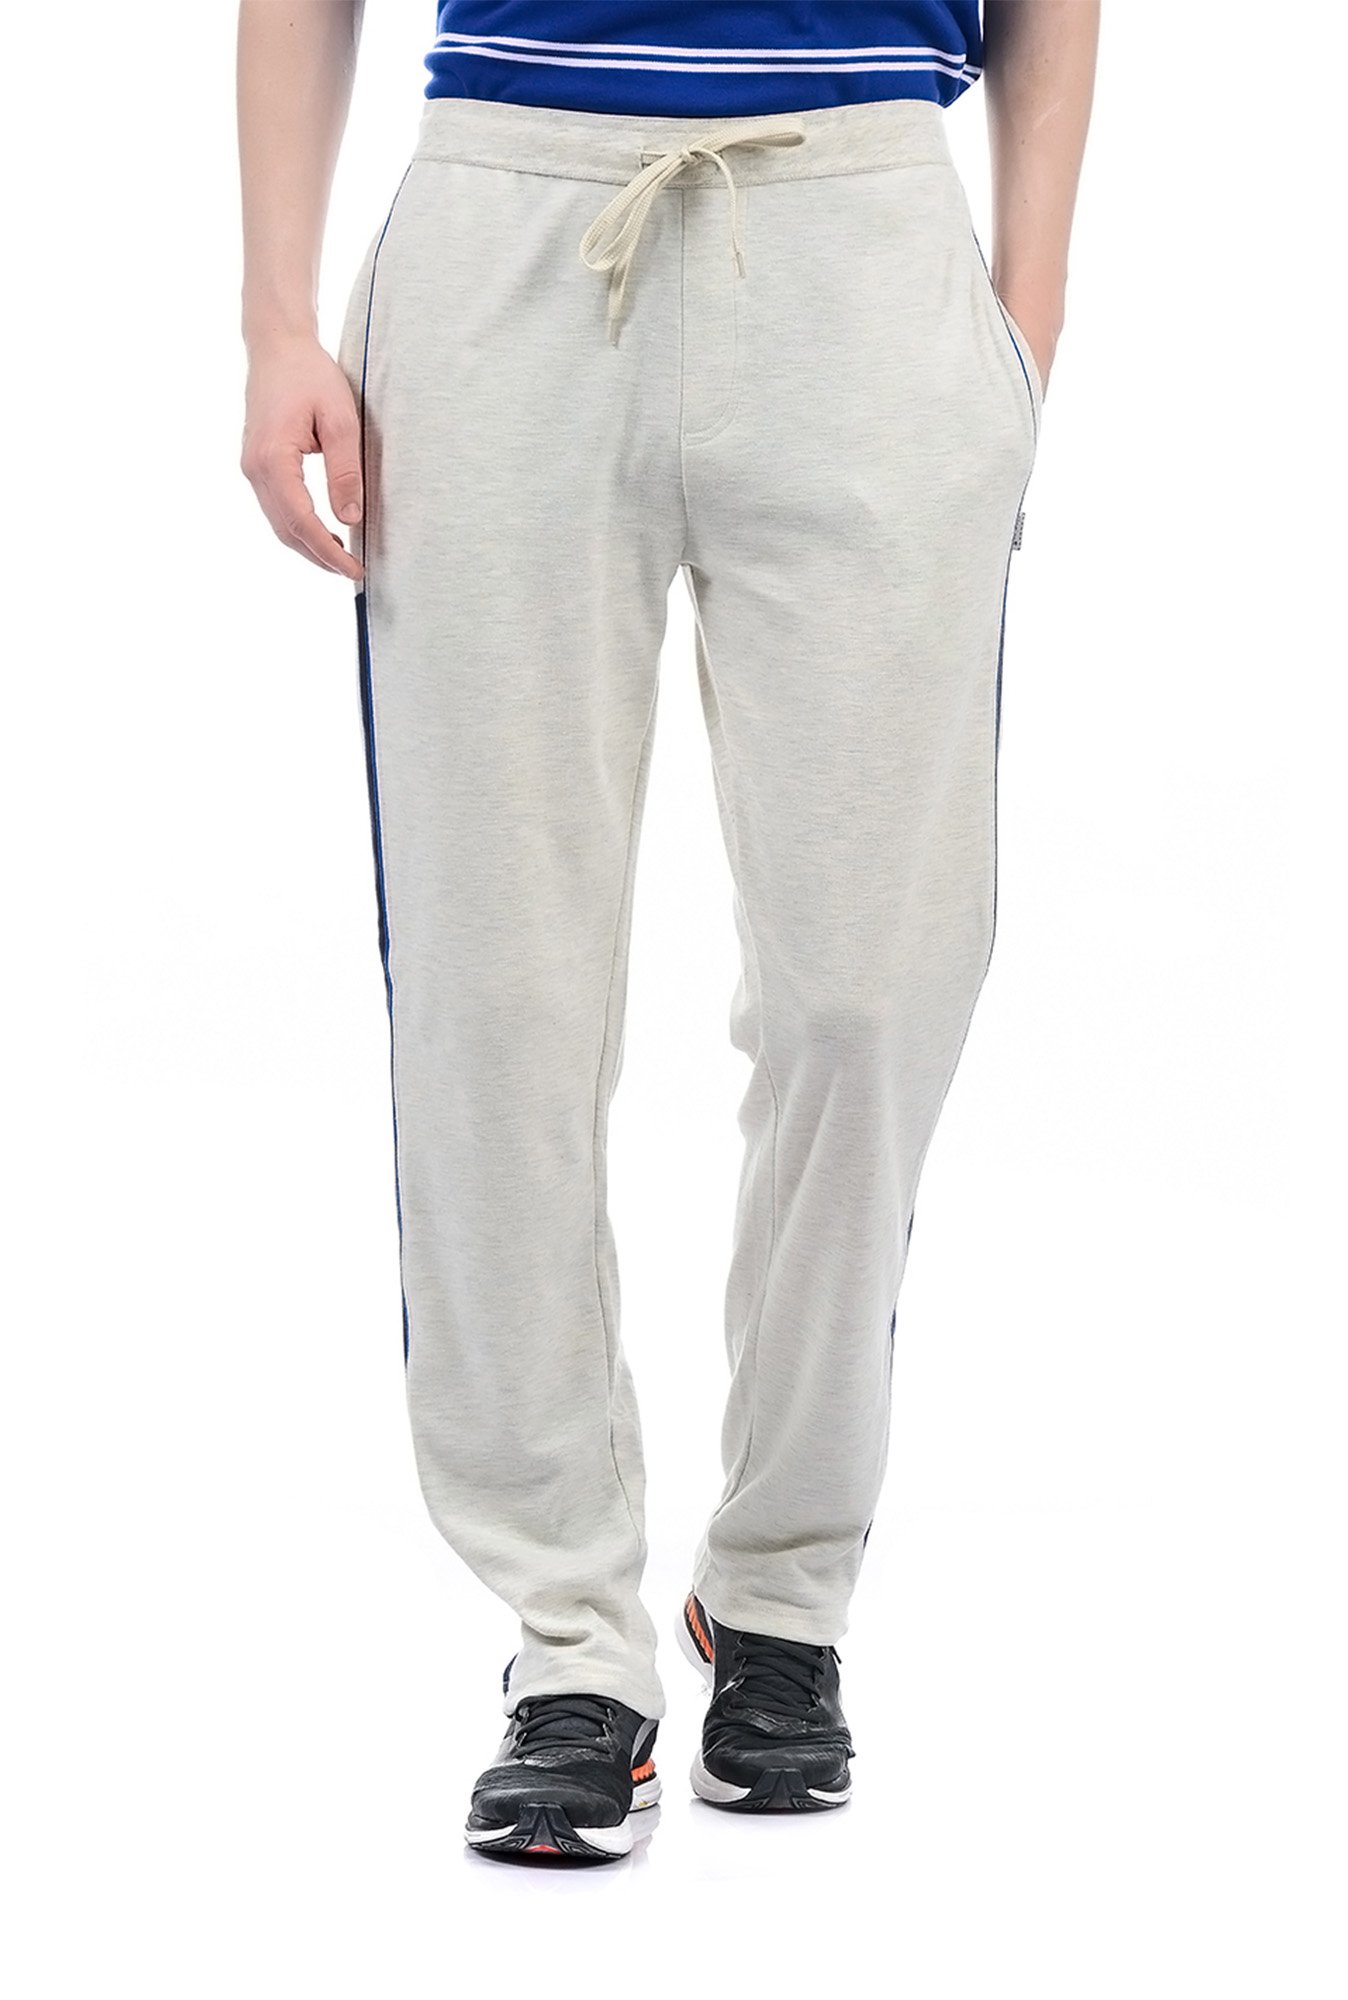 Buy Hanes Off White Regular Fit Track Pants from top Brands at Best Prices  Online in India  Tata CLiQ